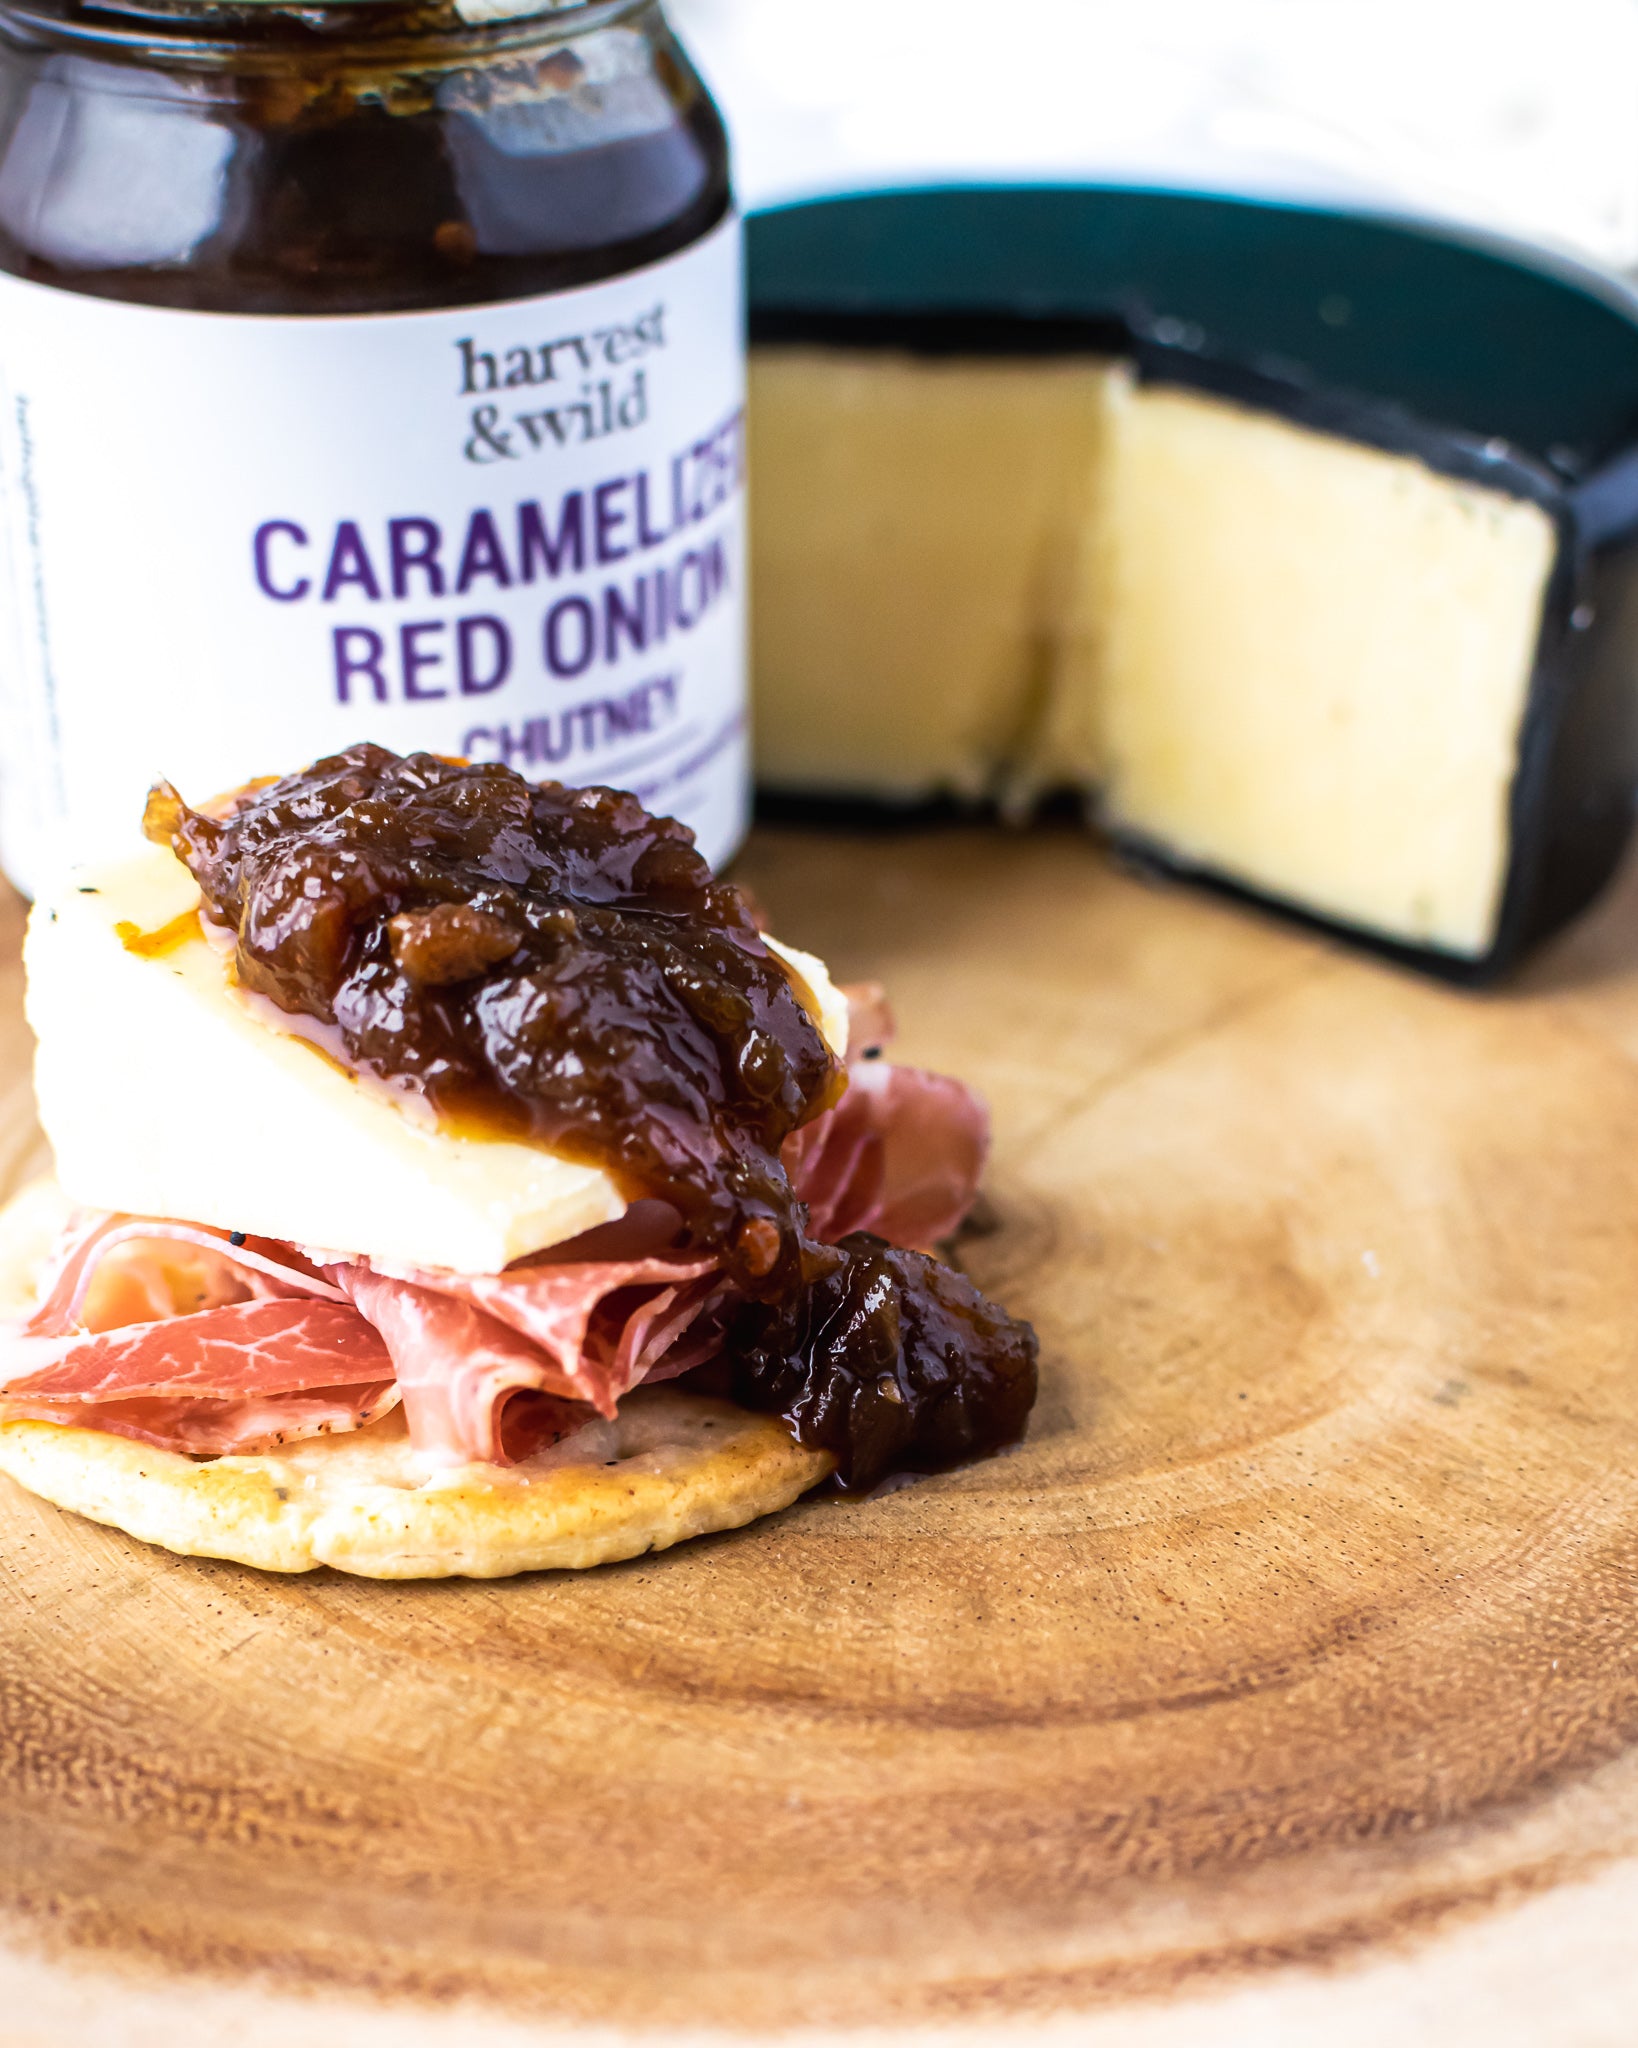 Caramelized Red Onion chutney on top of wedge of cheese and ham, wheel of cheese in in background - Harvest and Wild